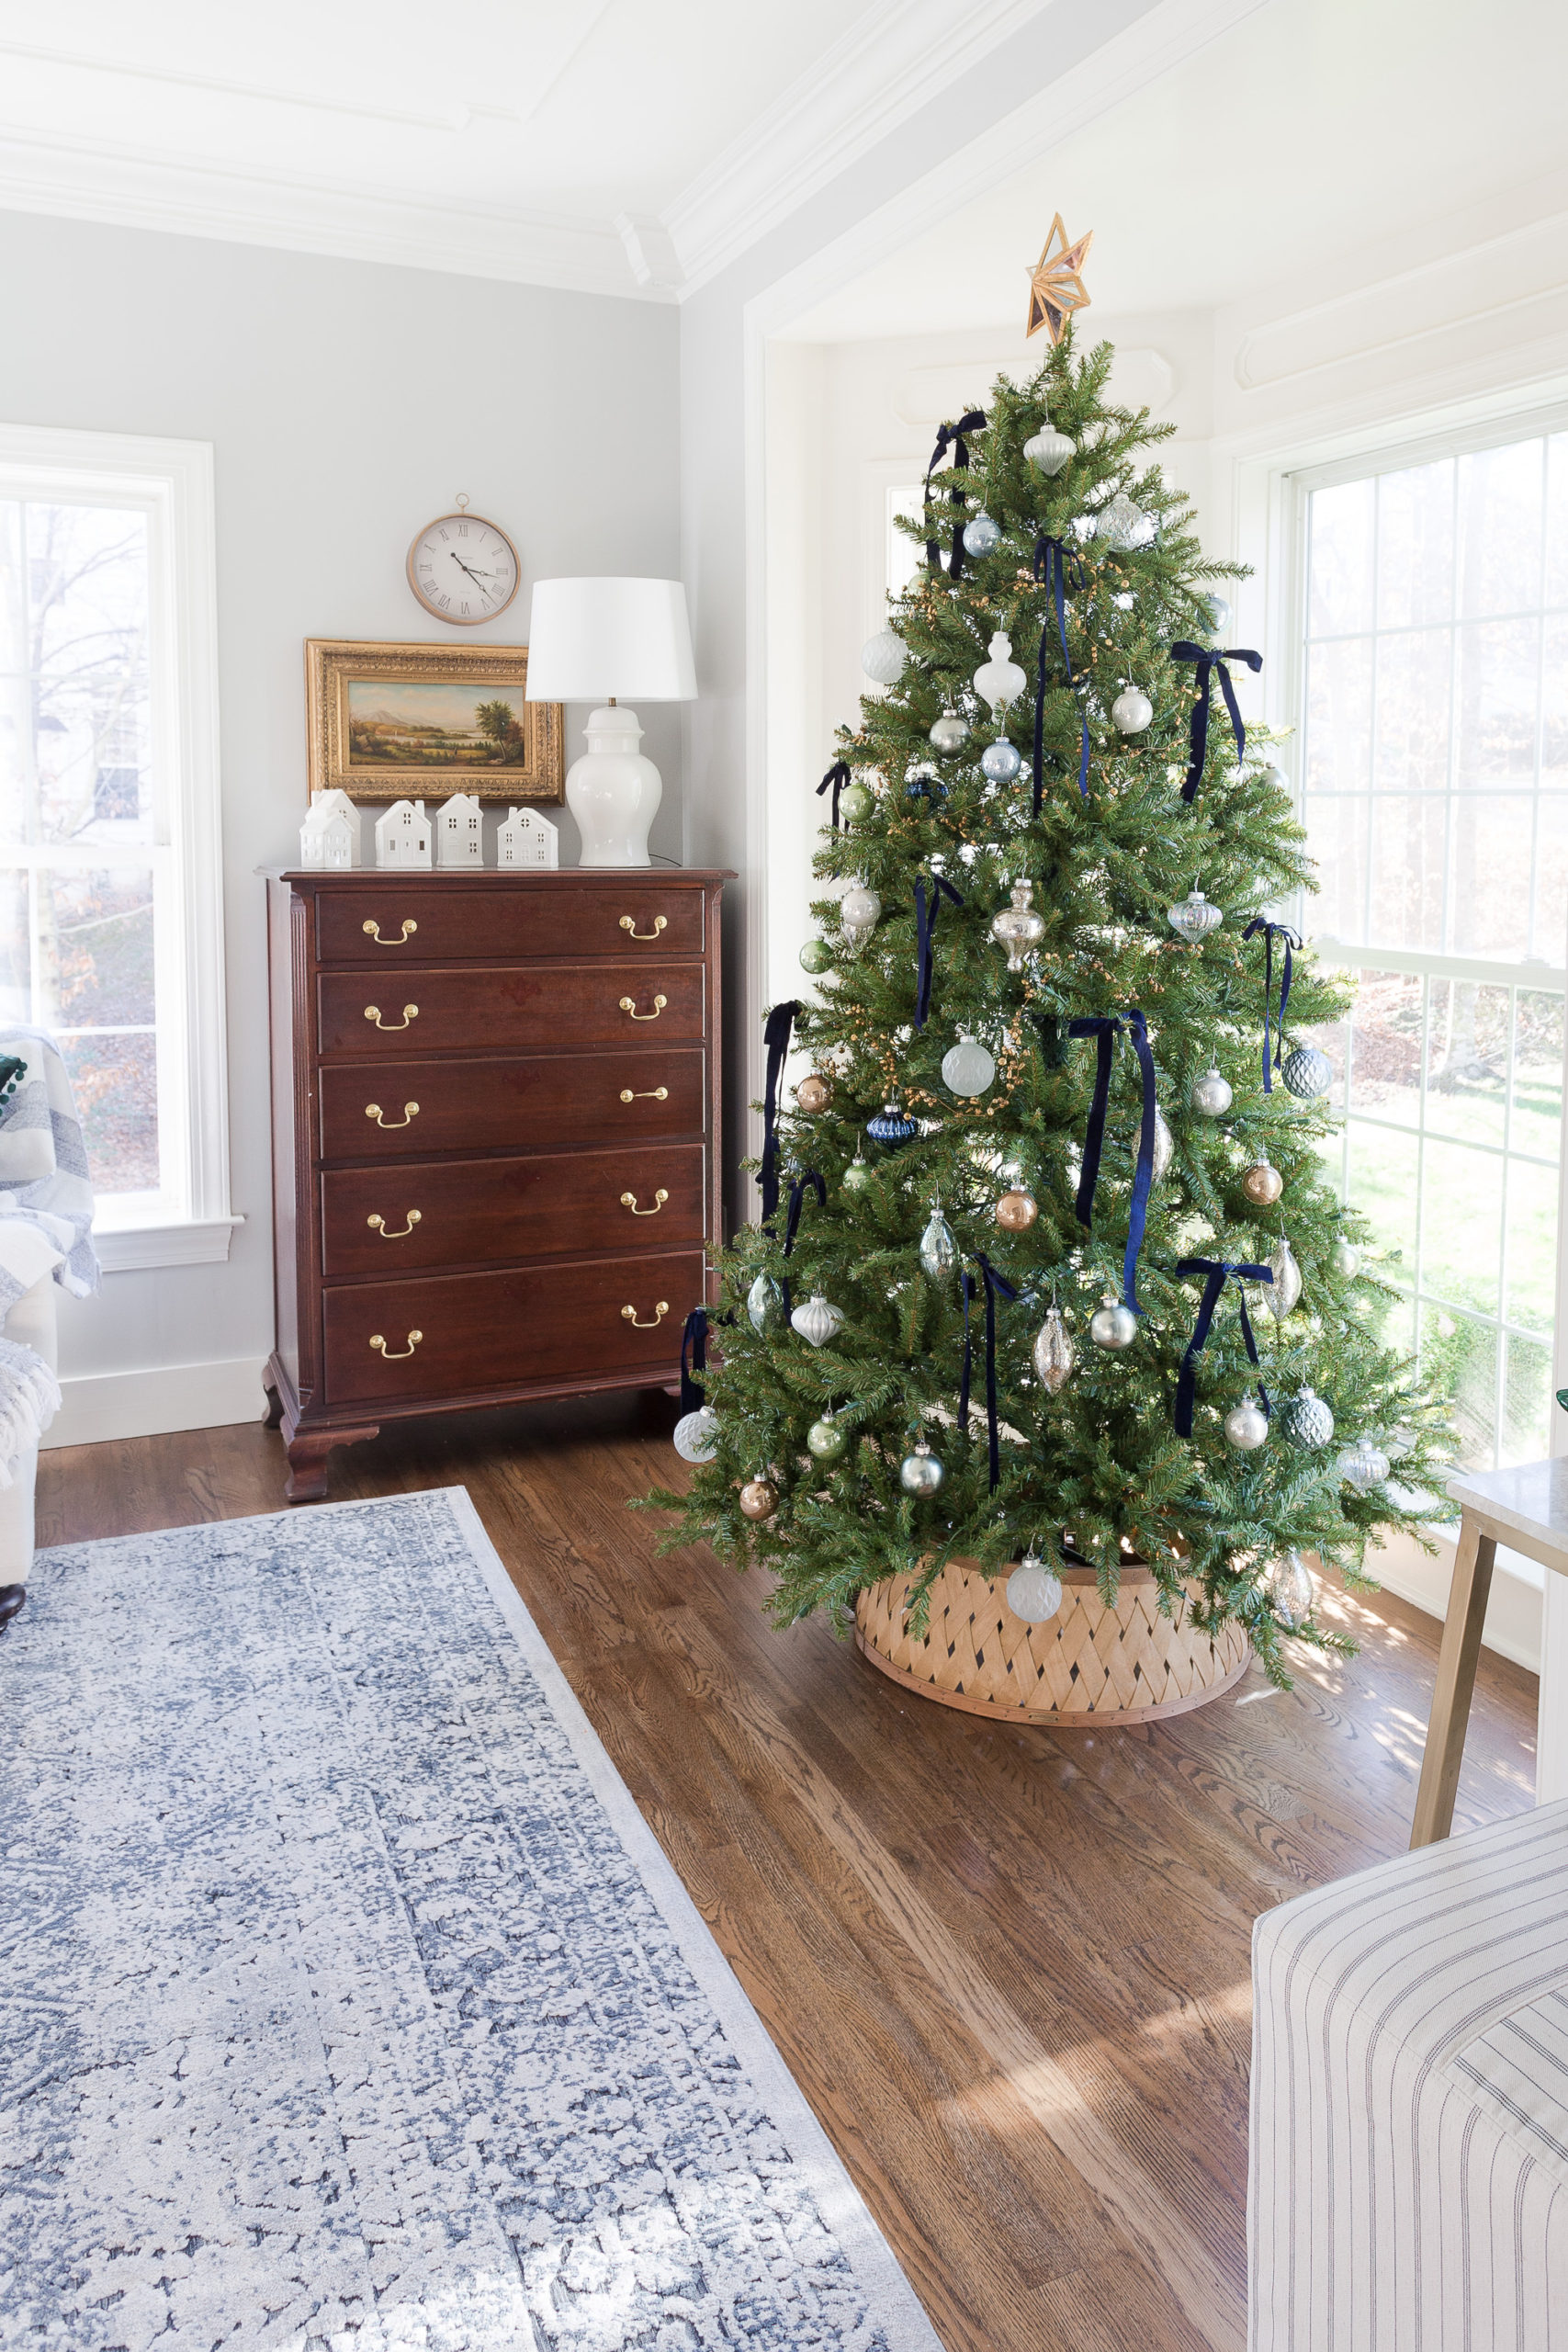 Christmas tree in living room with blue bows, ornaments and Christmas tree collar